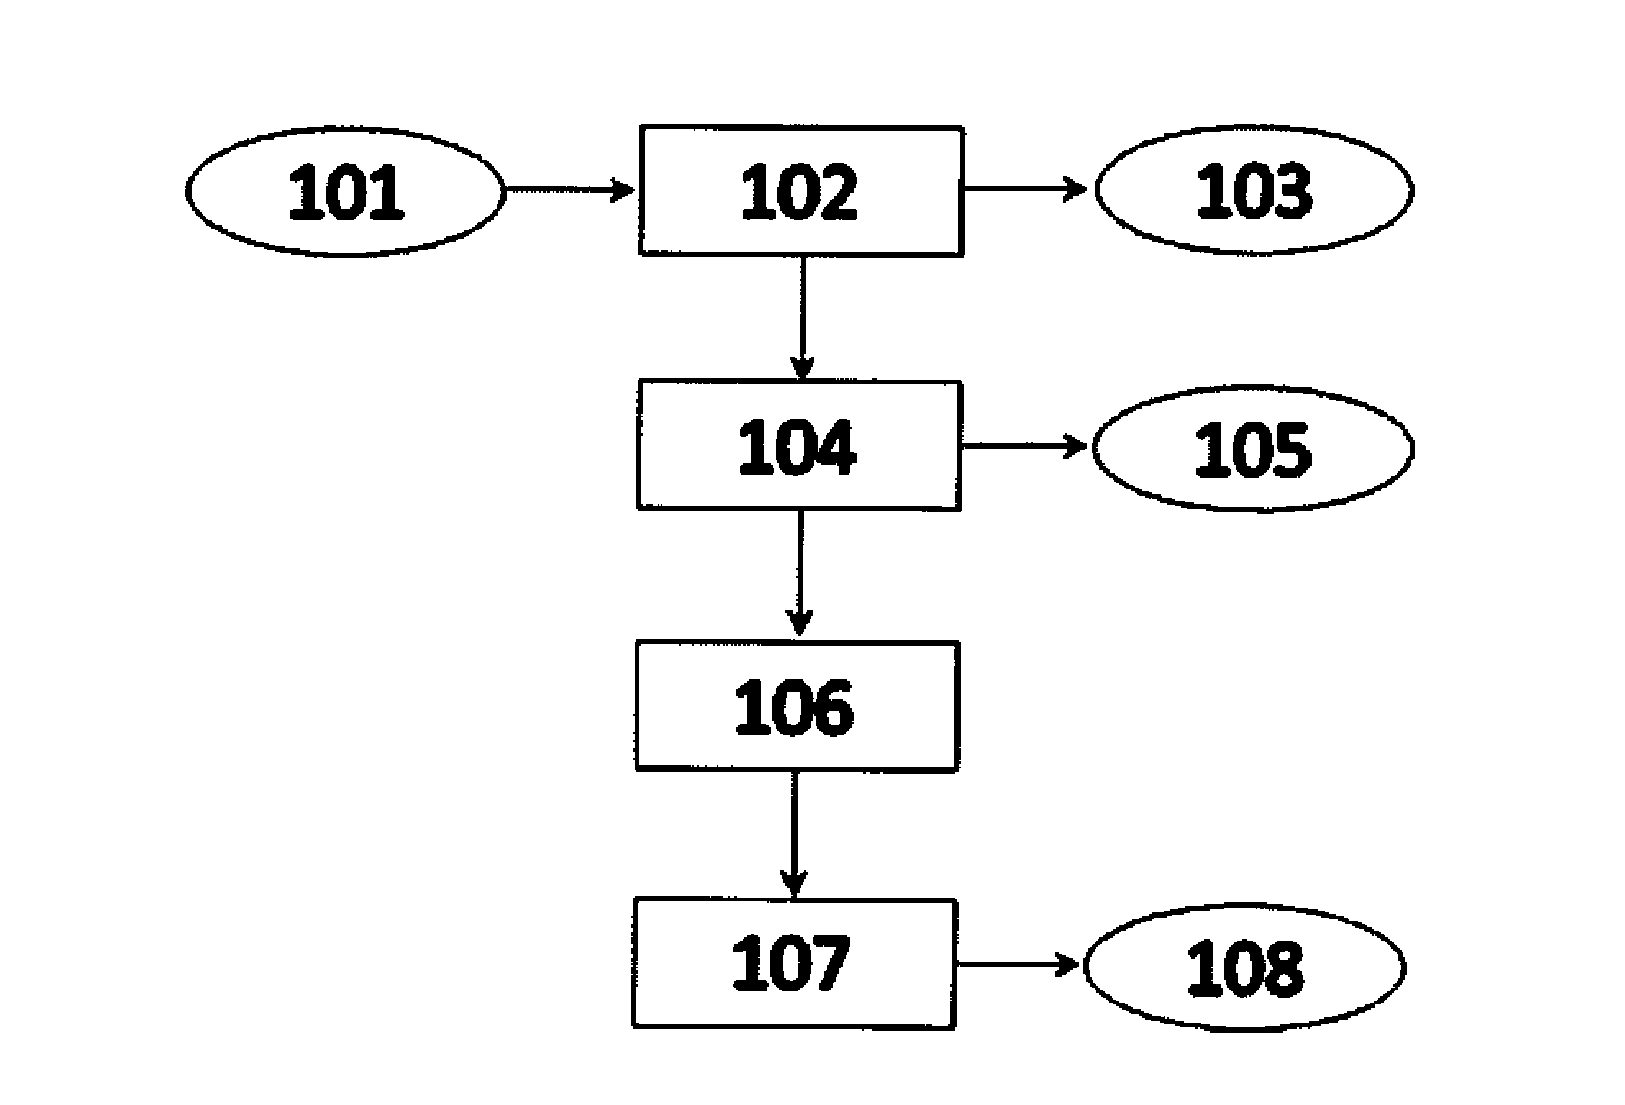 Dynamic interest forwarding mechanism for information centric networking